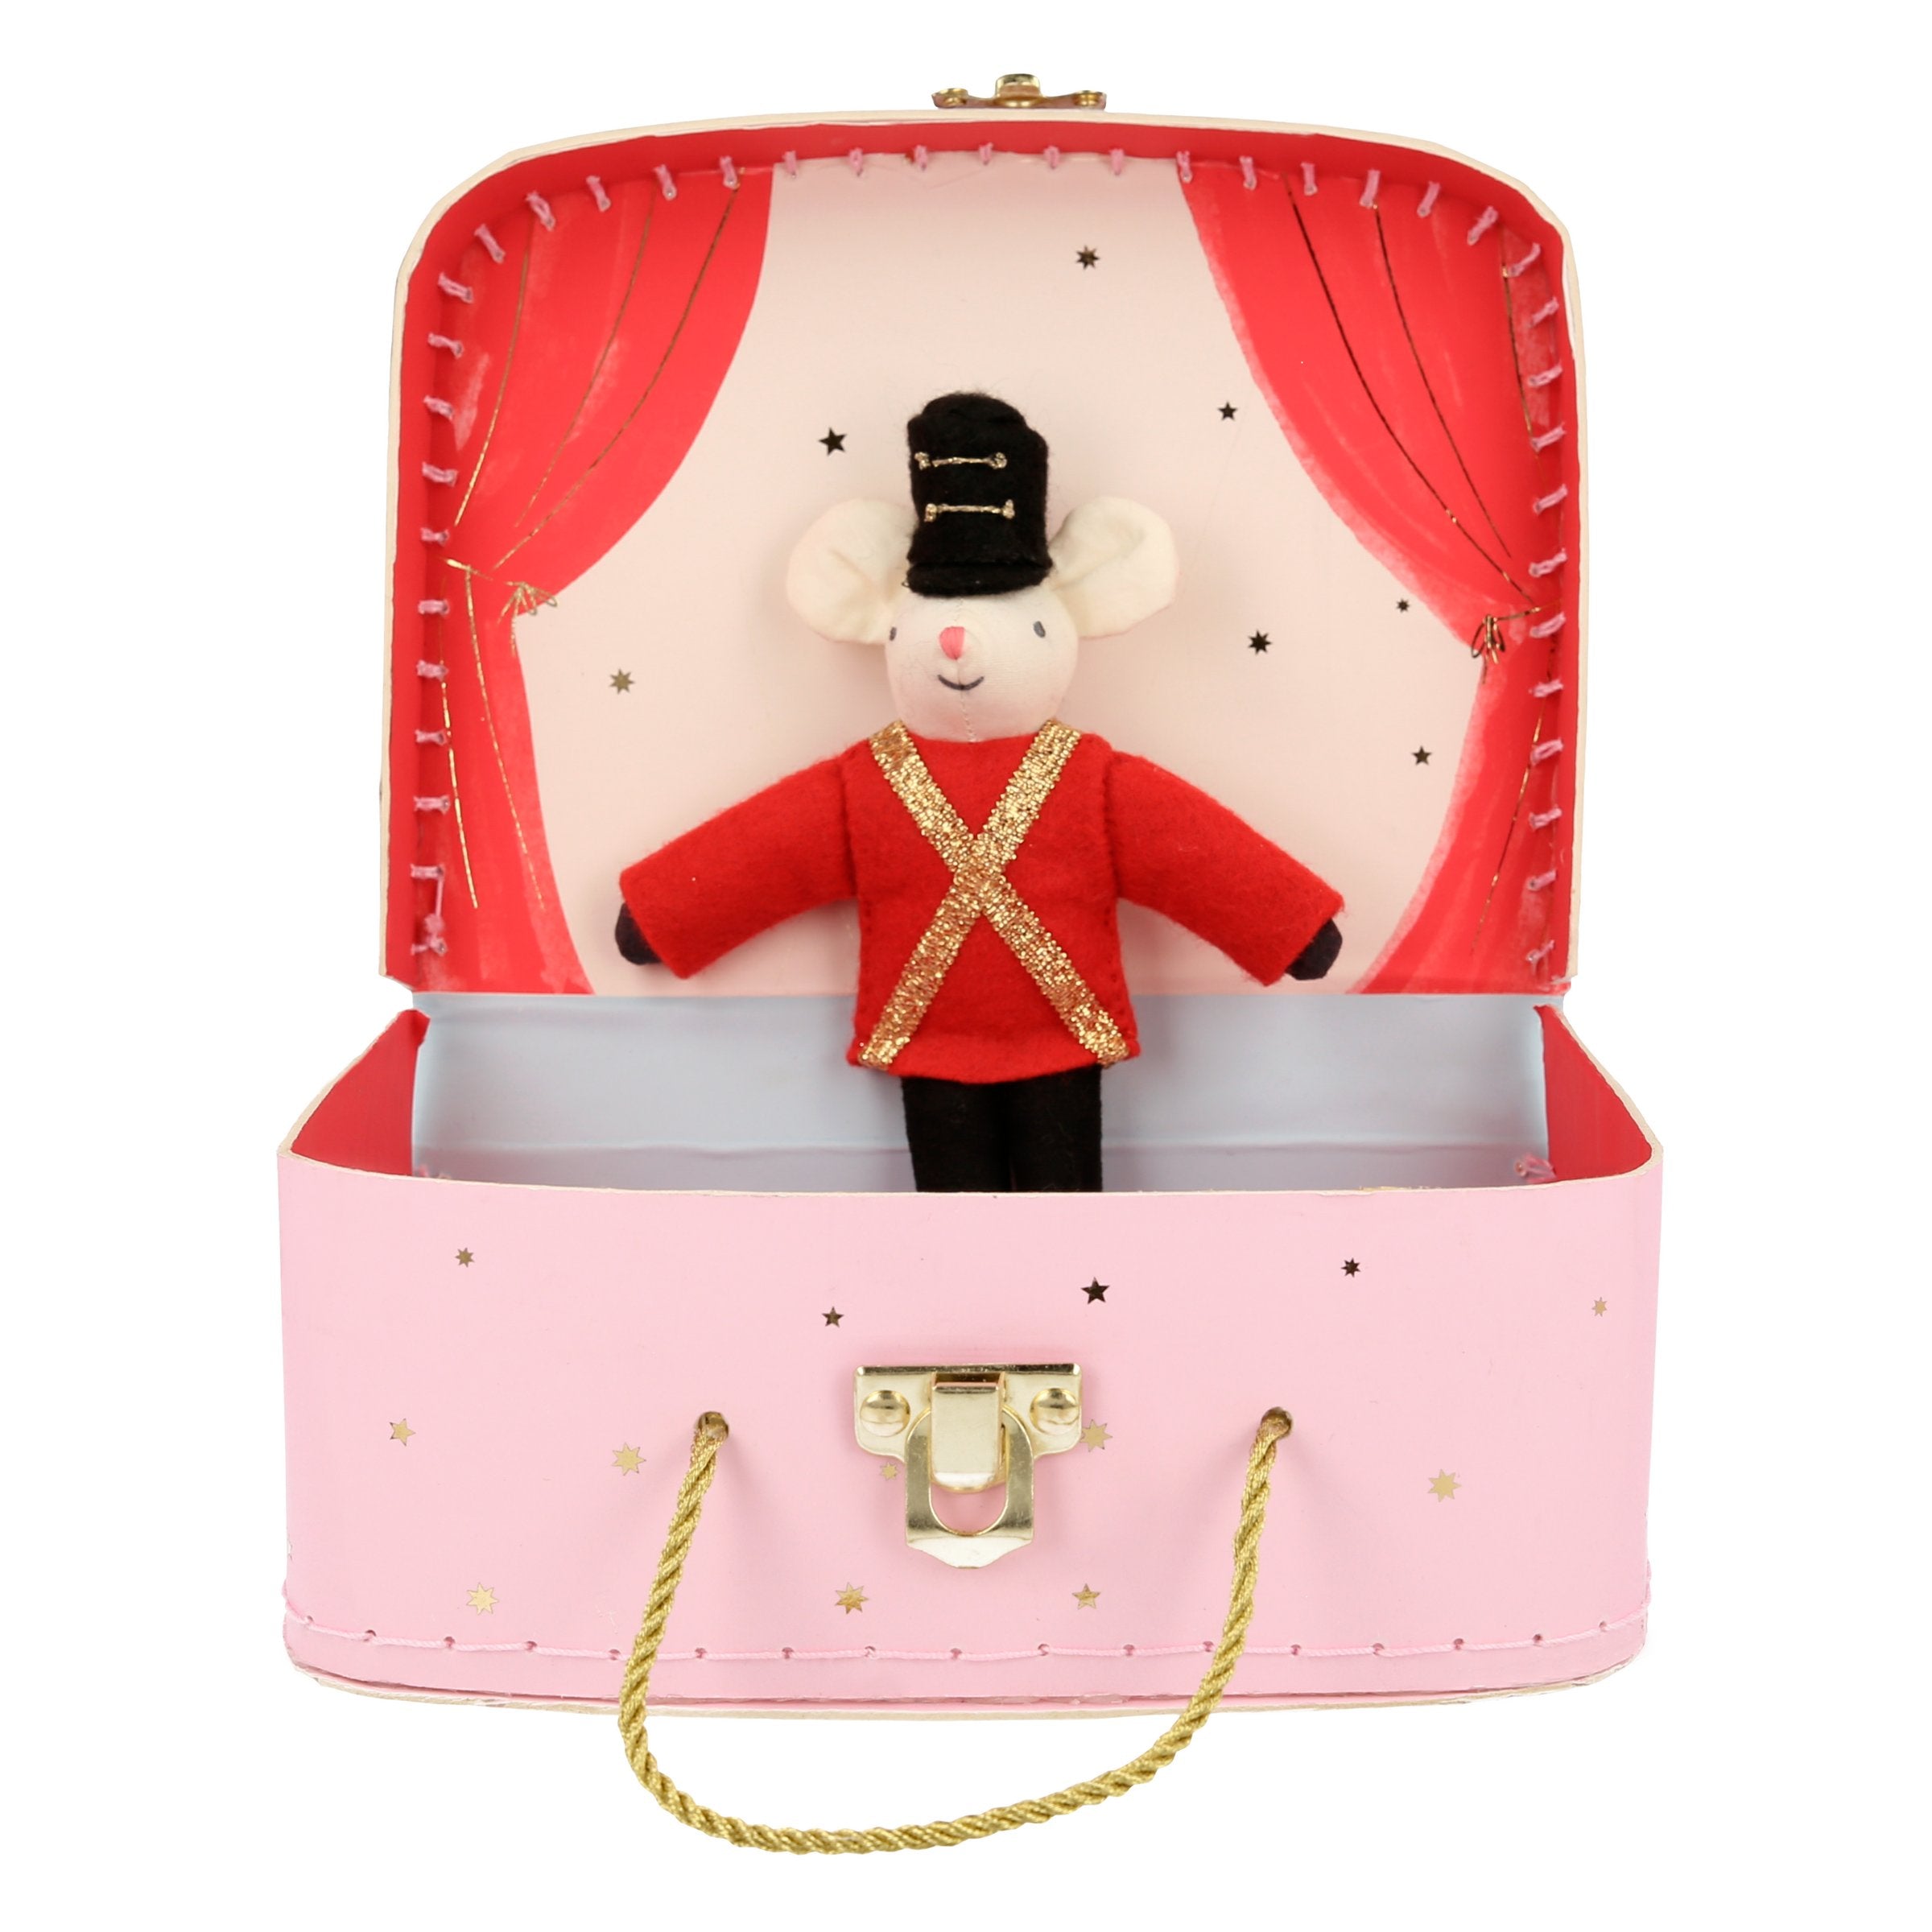 This pink mini suitcase contains 2 fabric ballet dolls, with a theater backdrop and little blanket.